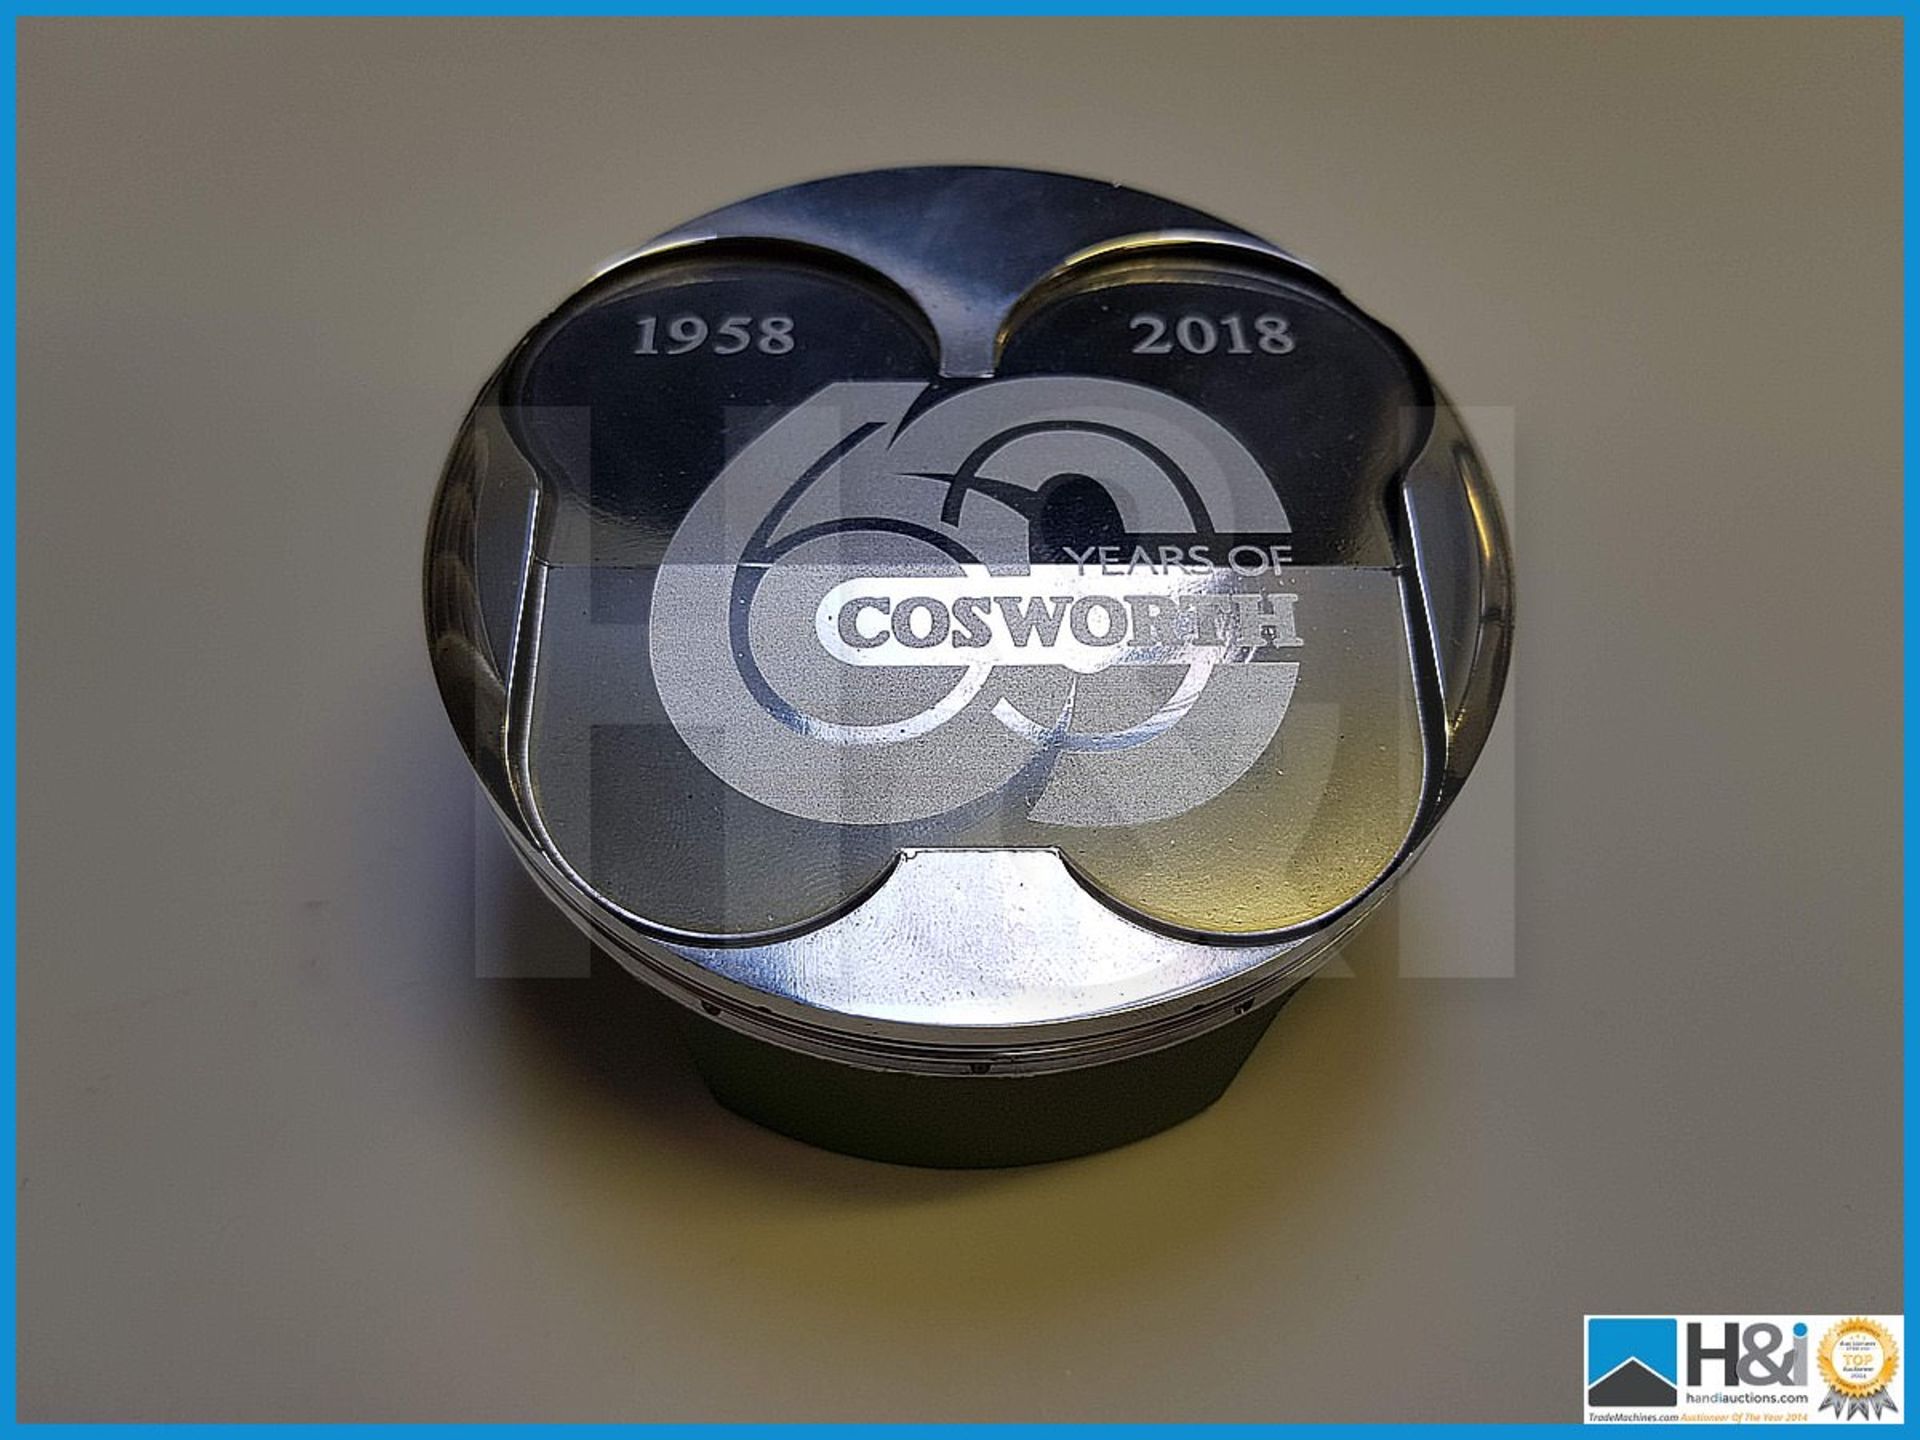 Exclusive commemorative Cosworth laser etched 60th anniverary piston. This is one of only five made